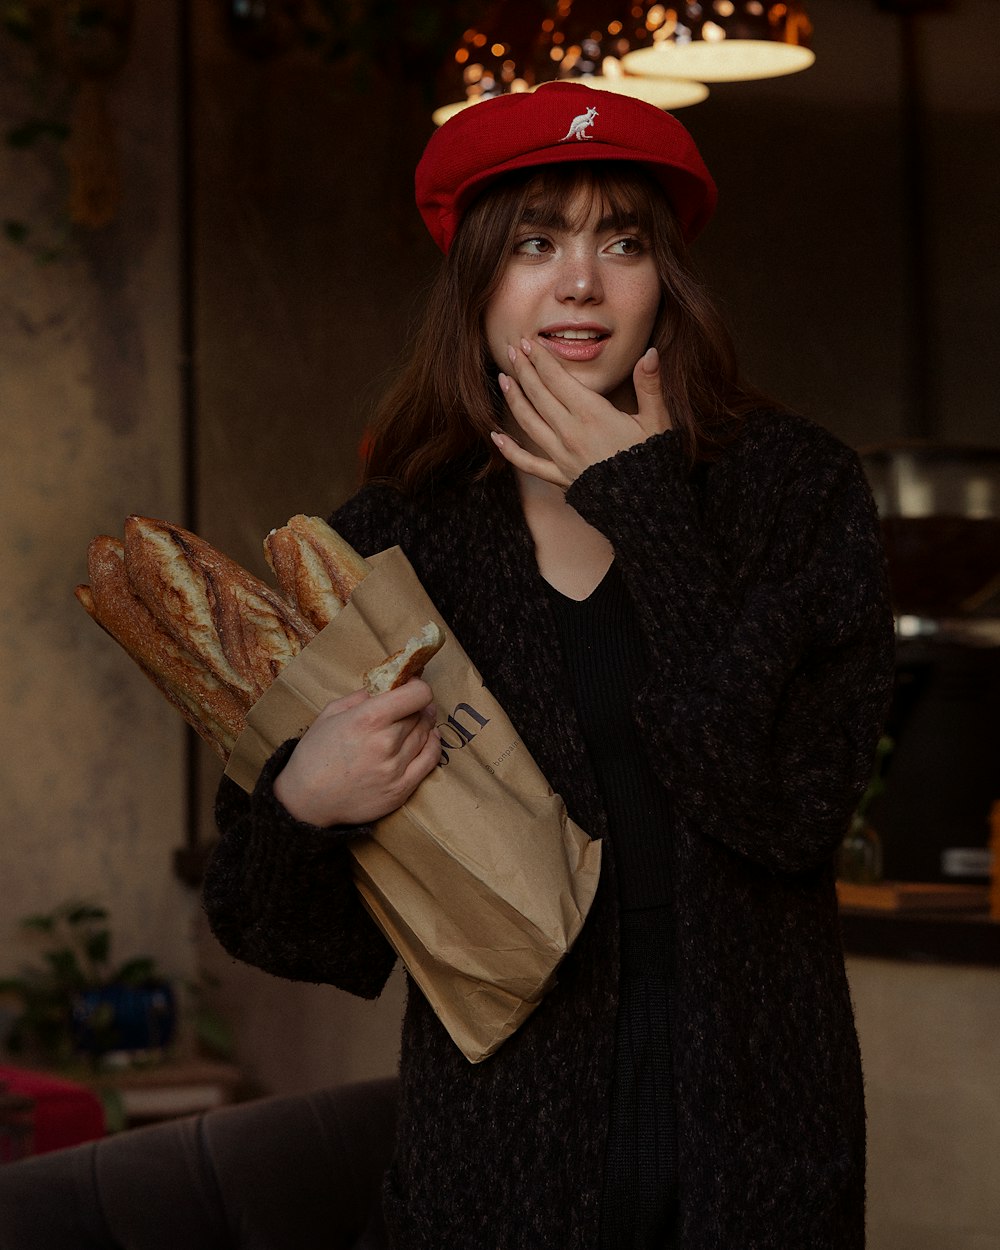 a woman in a red hat holding a bag of bread